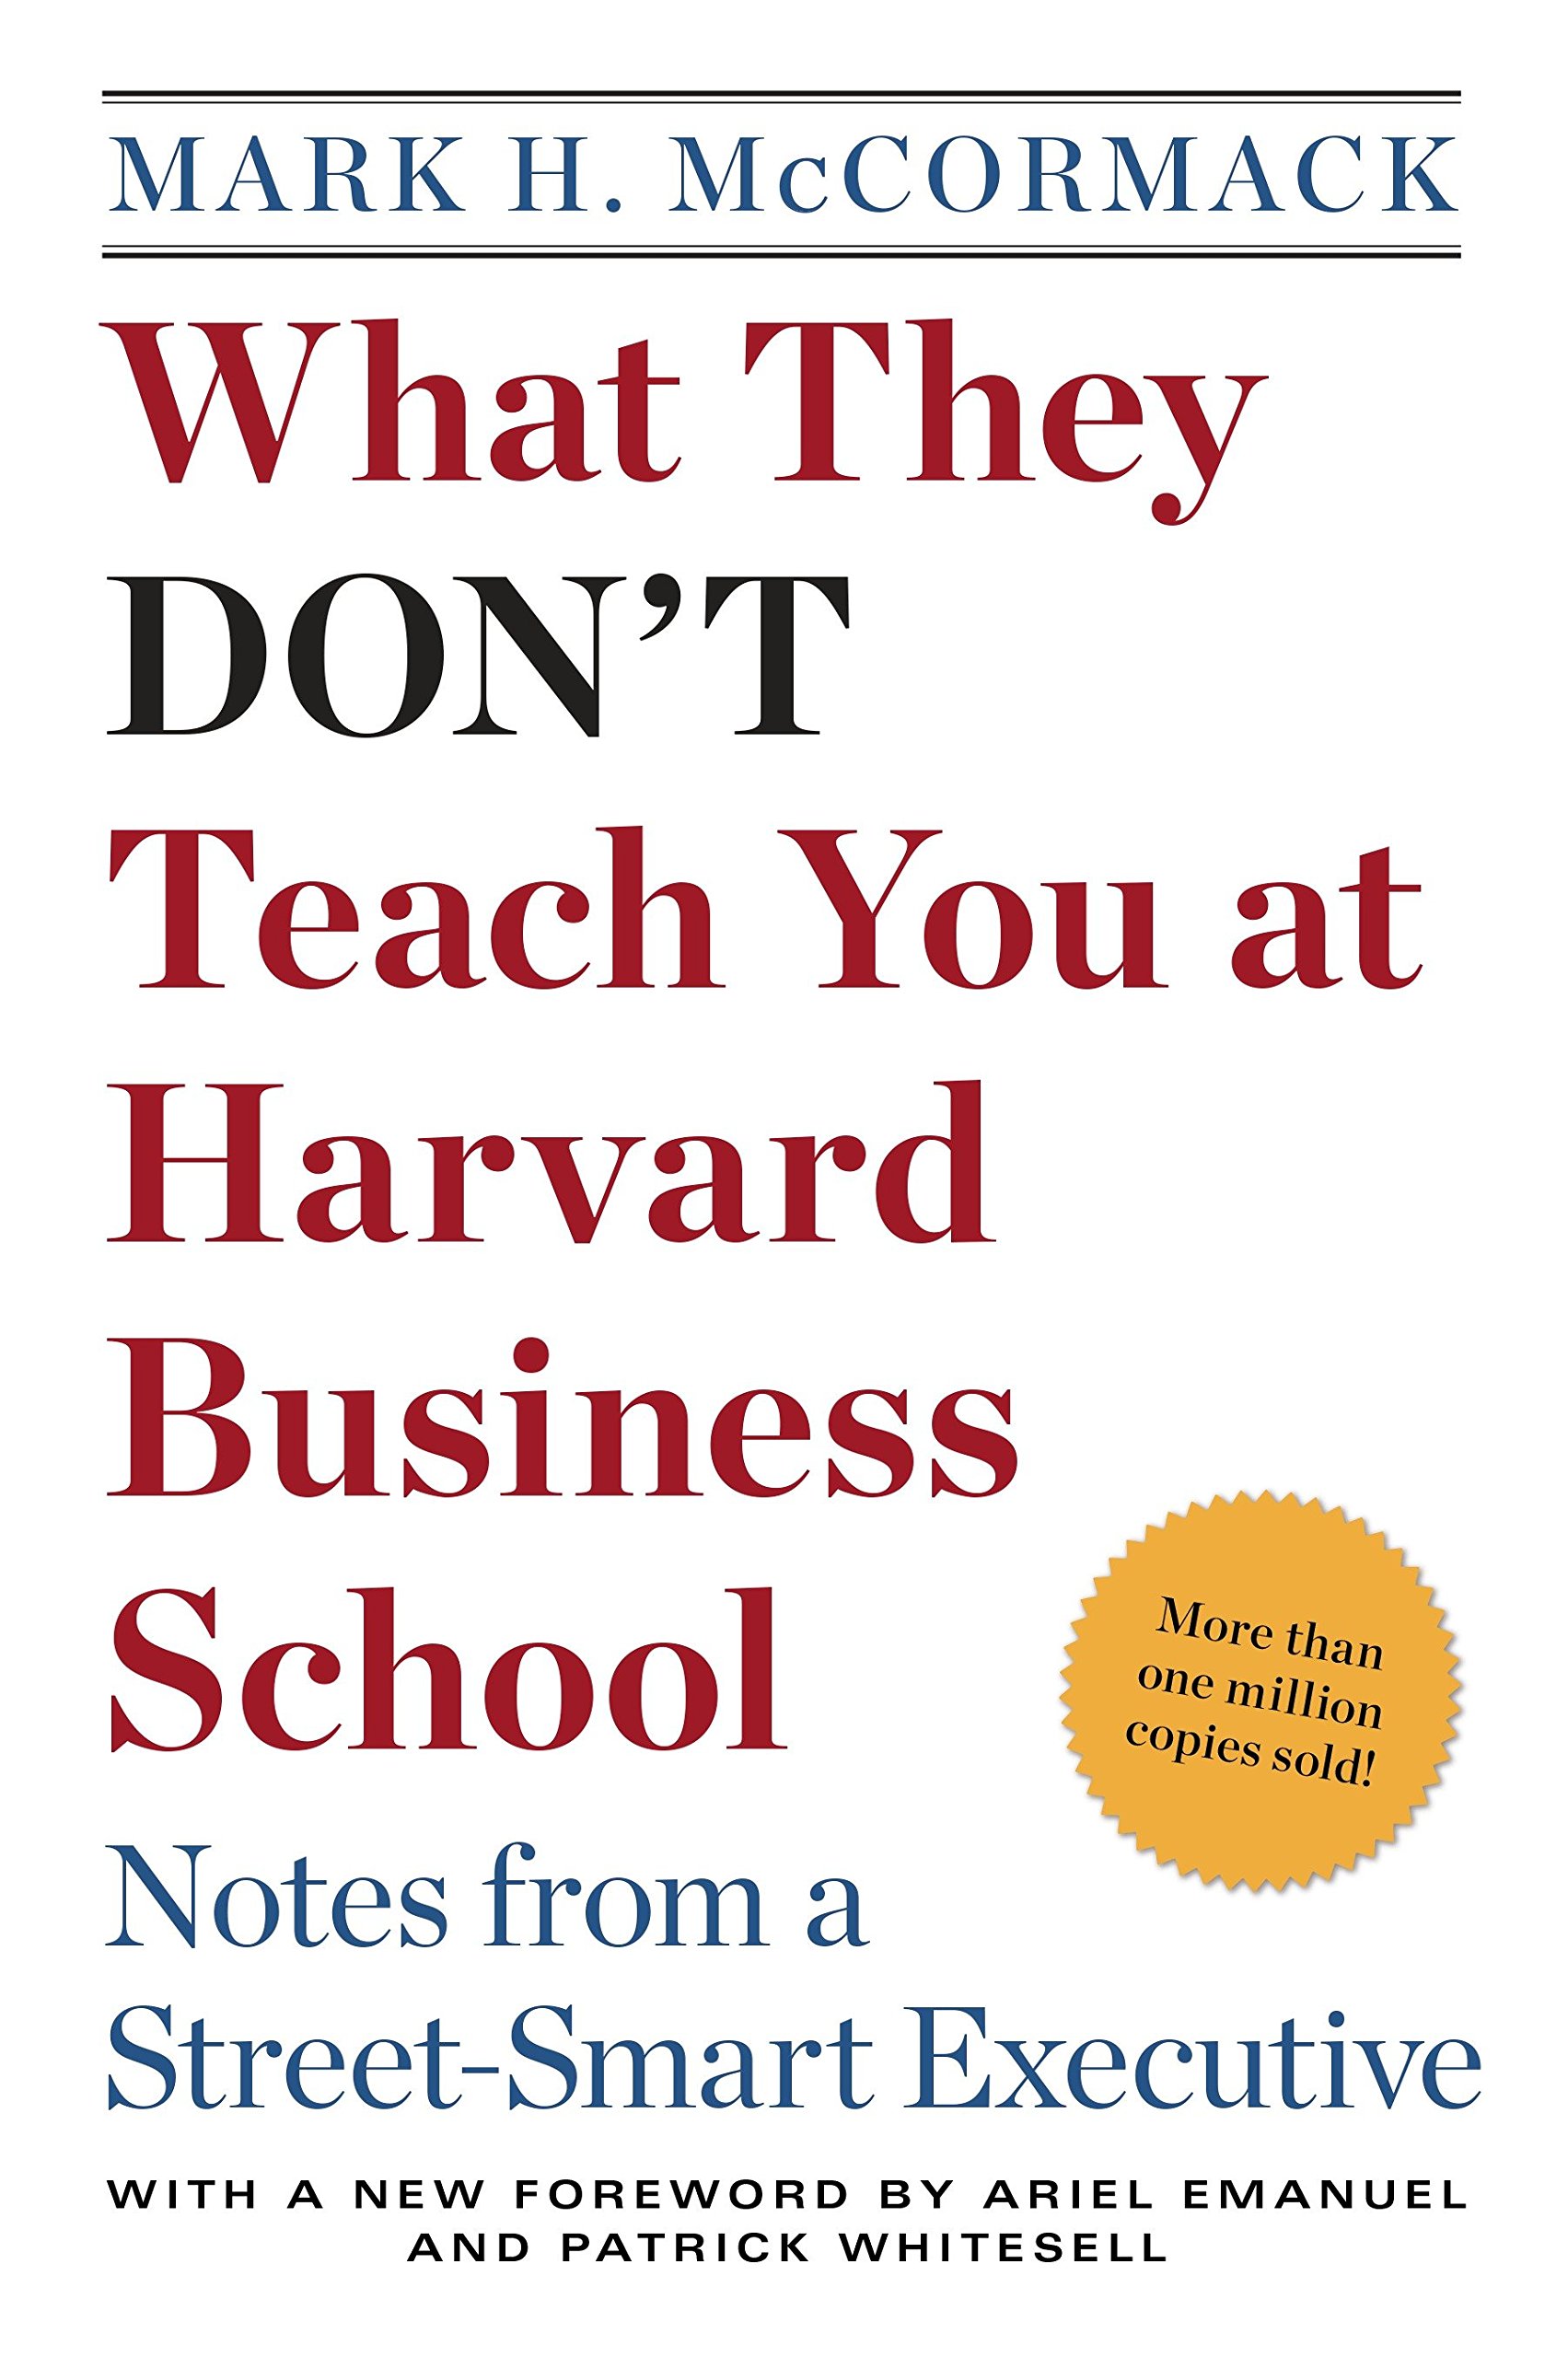 What They Don't Teach You at Harvard Business School - Must Read Business Books for Entrepreneurs in 2022